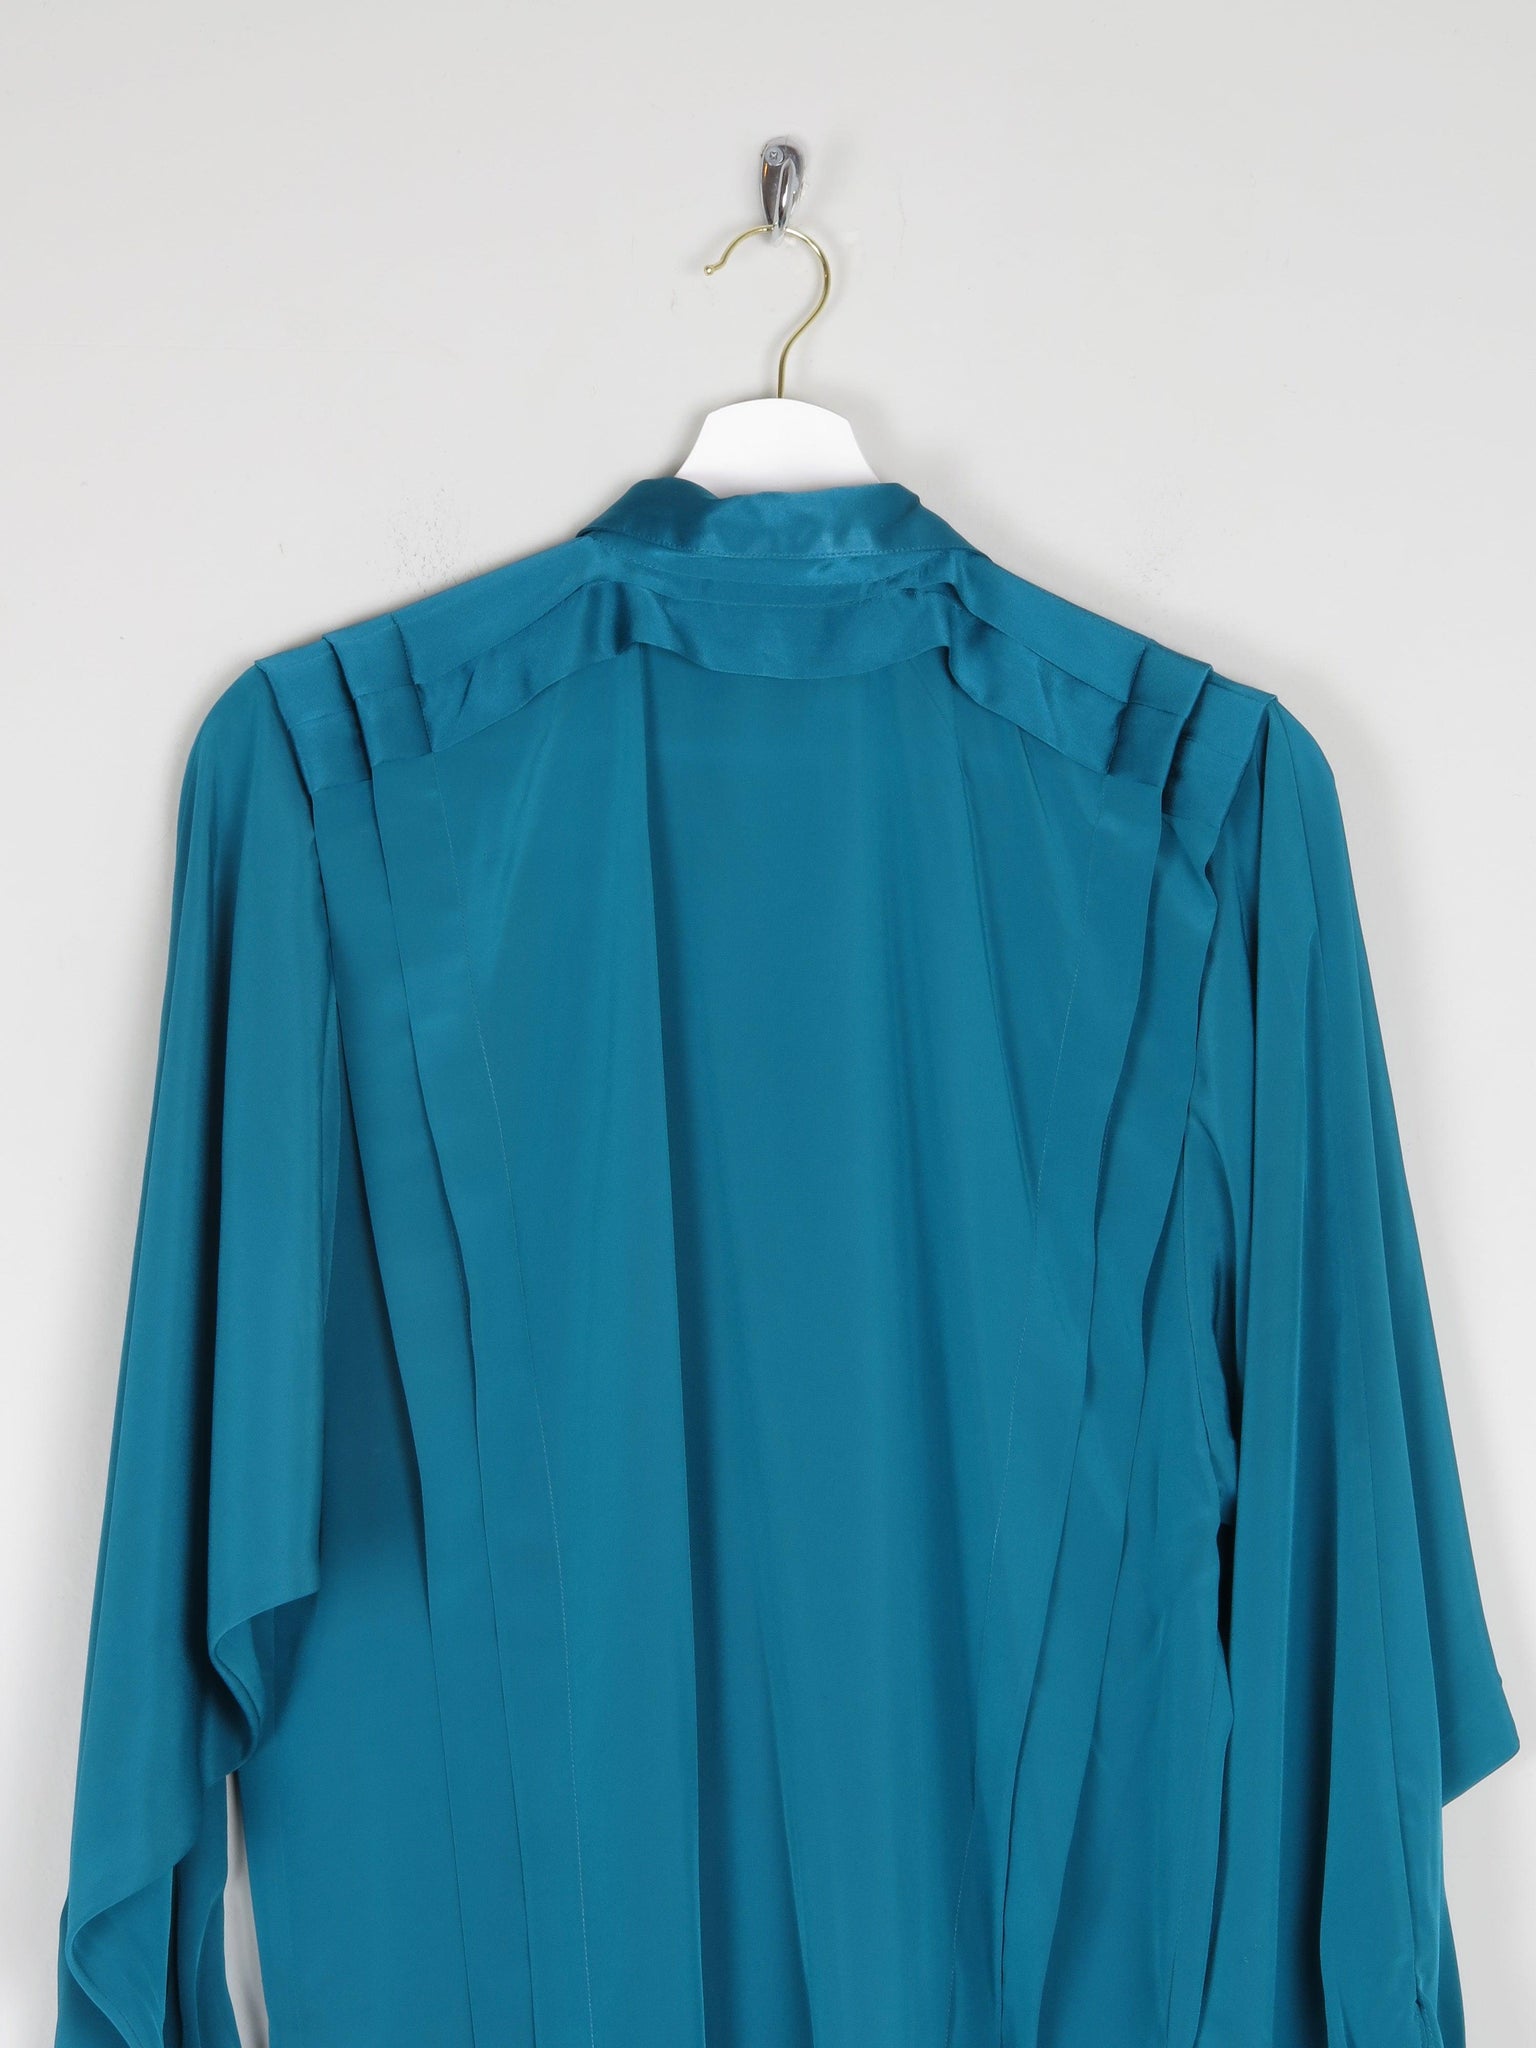 Women's Vintage Aqua Green Blouse With Bow Detail XS/S - The Harlequin